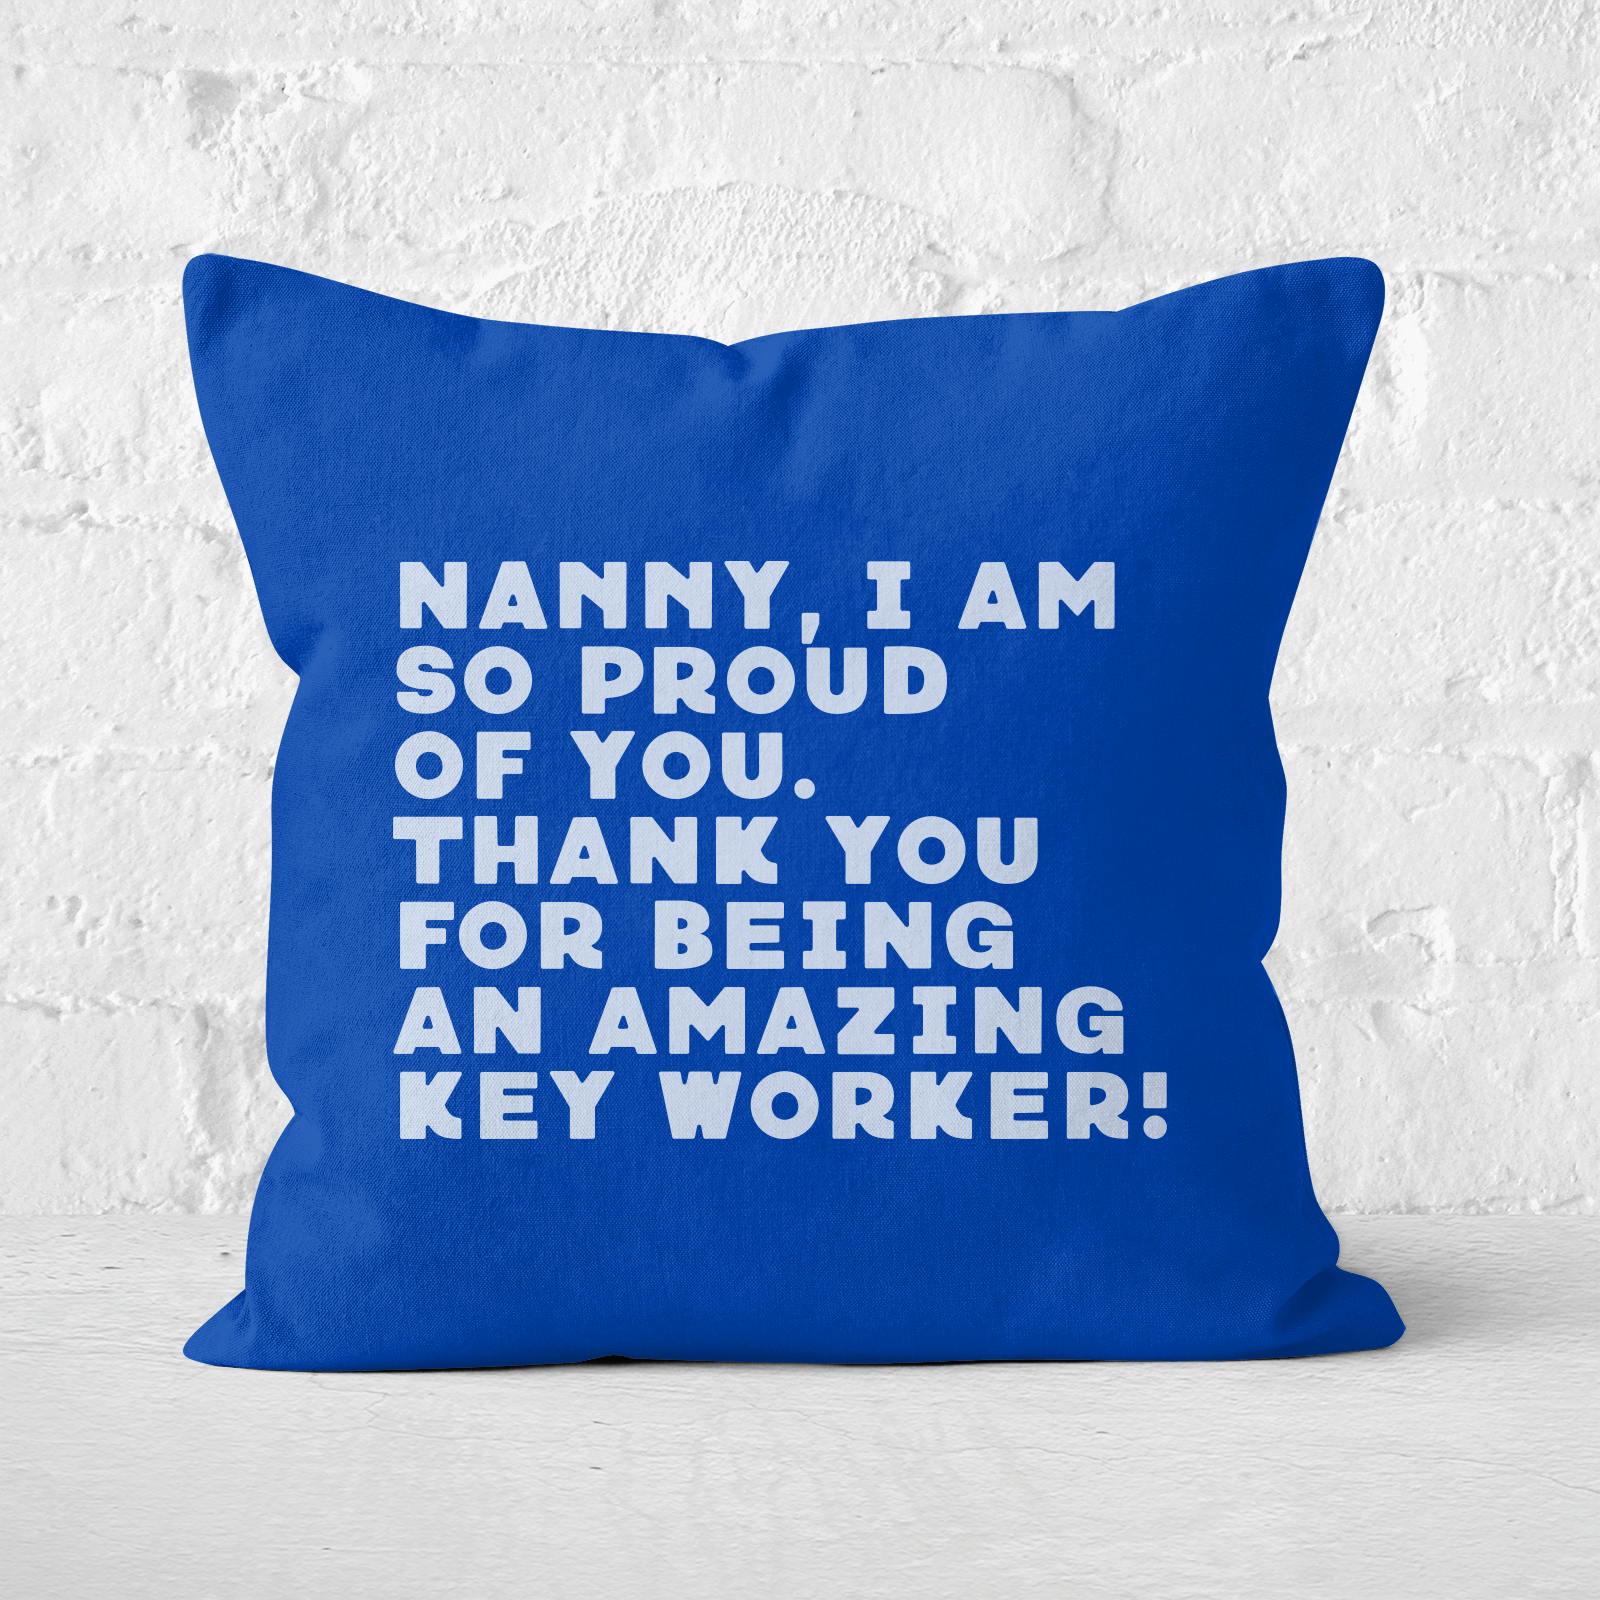 Nanny, I Am So Proud Of You. Square Cushion - 60x60cm - Soft Touch